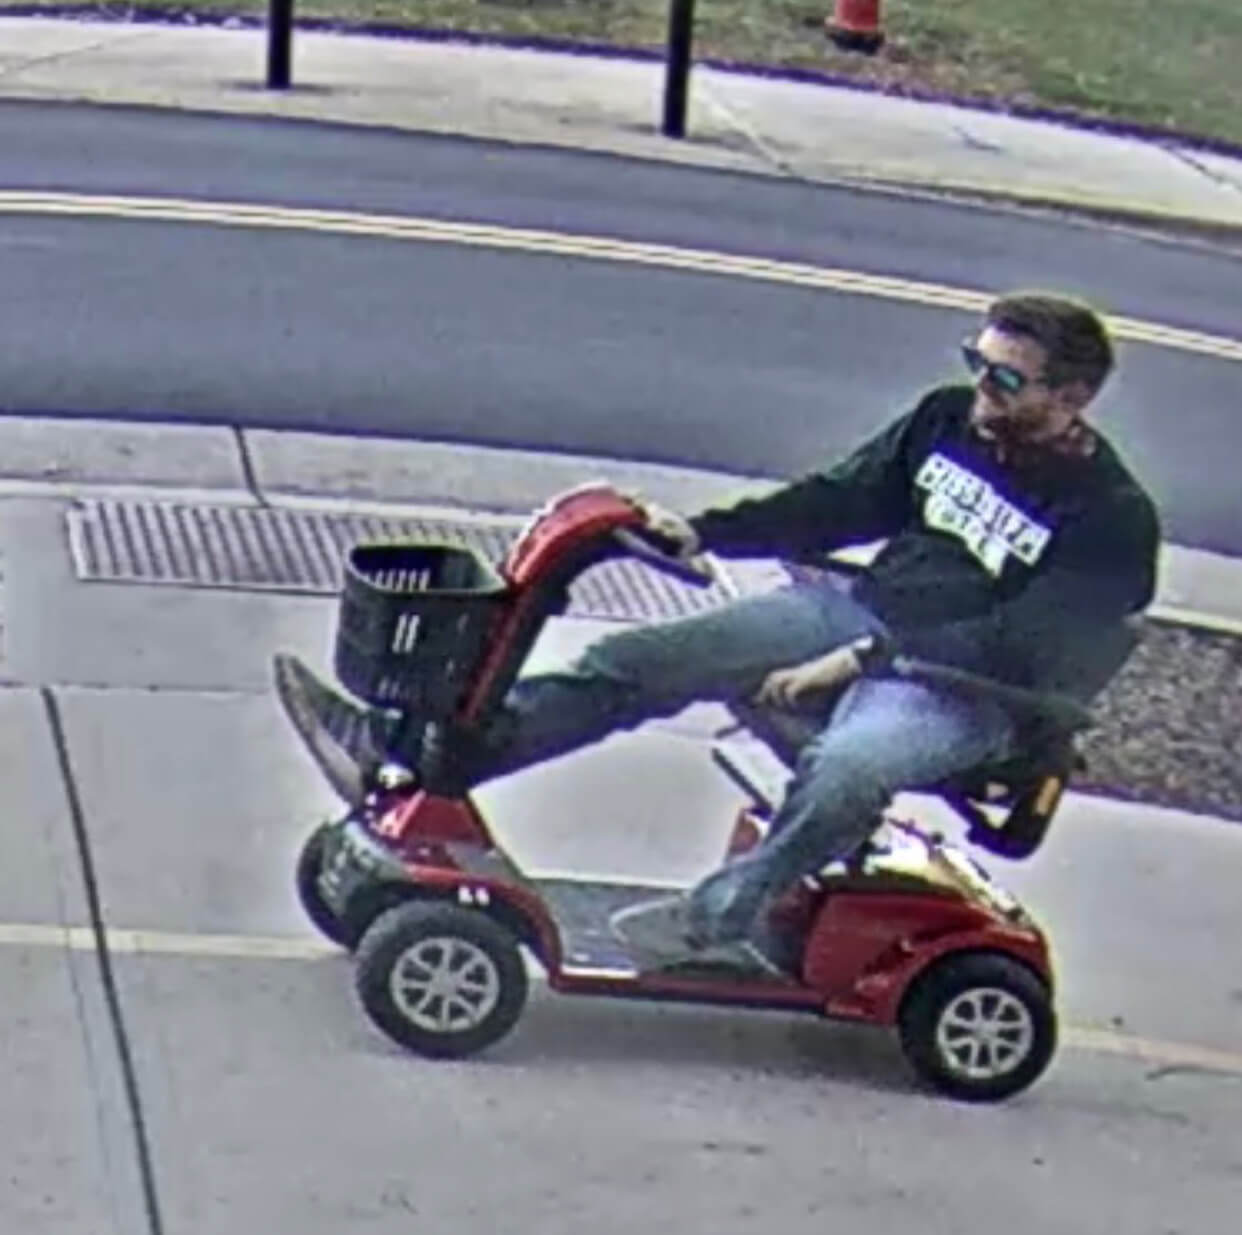 Mississippi State Student Arrested for Stealing Scooter from Elderly Man